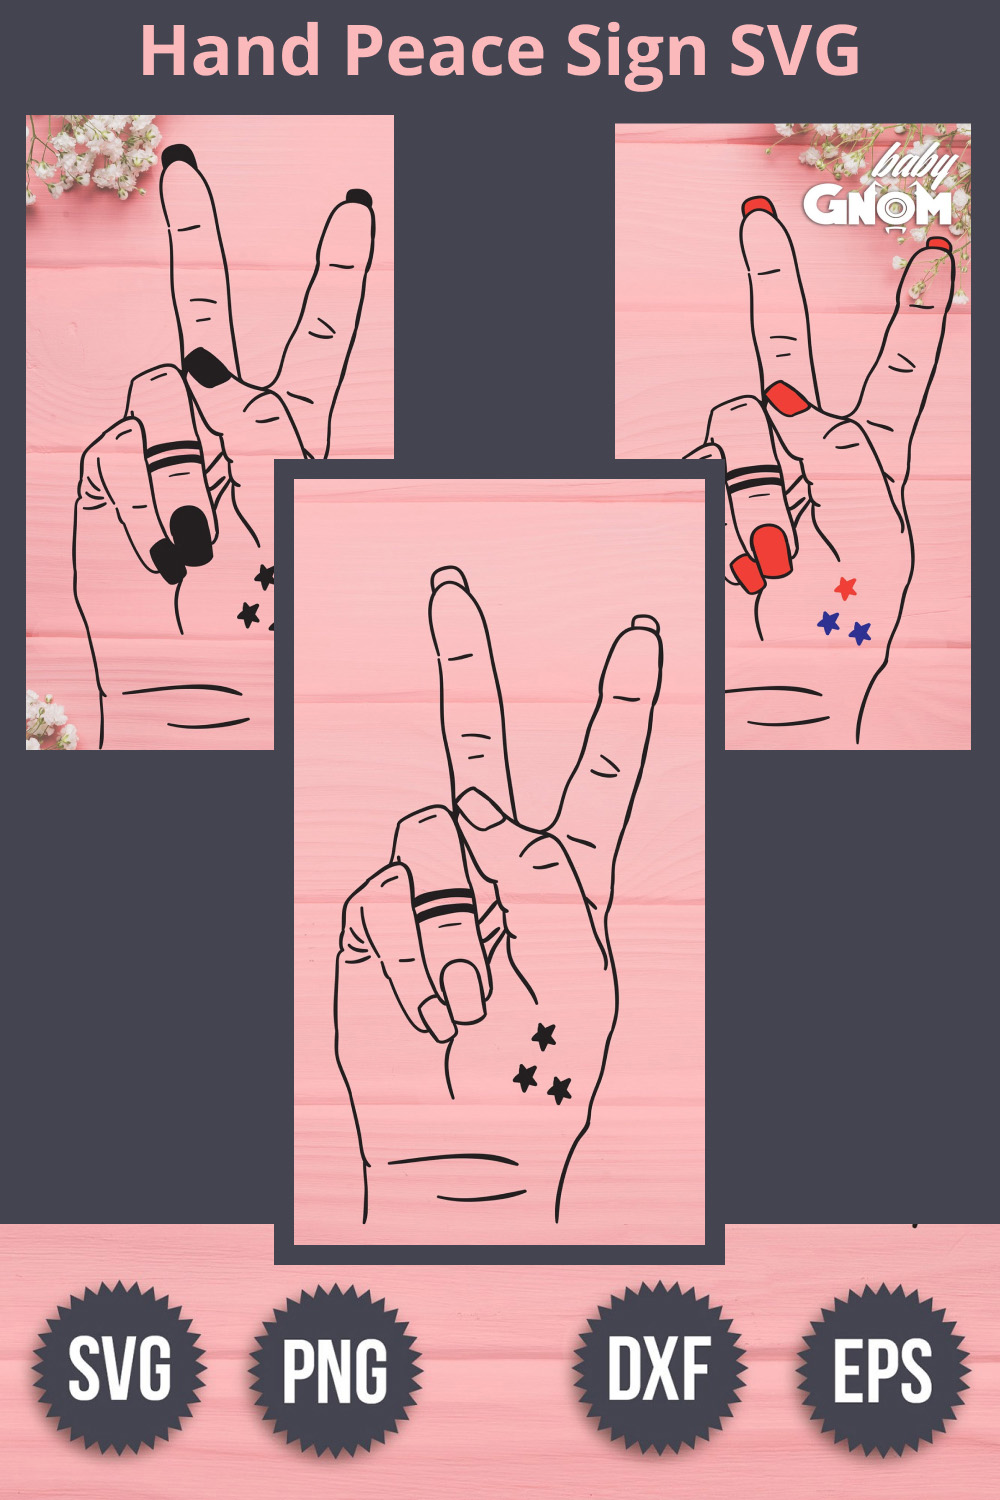 hand peace sign svg 01 1000x1500